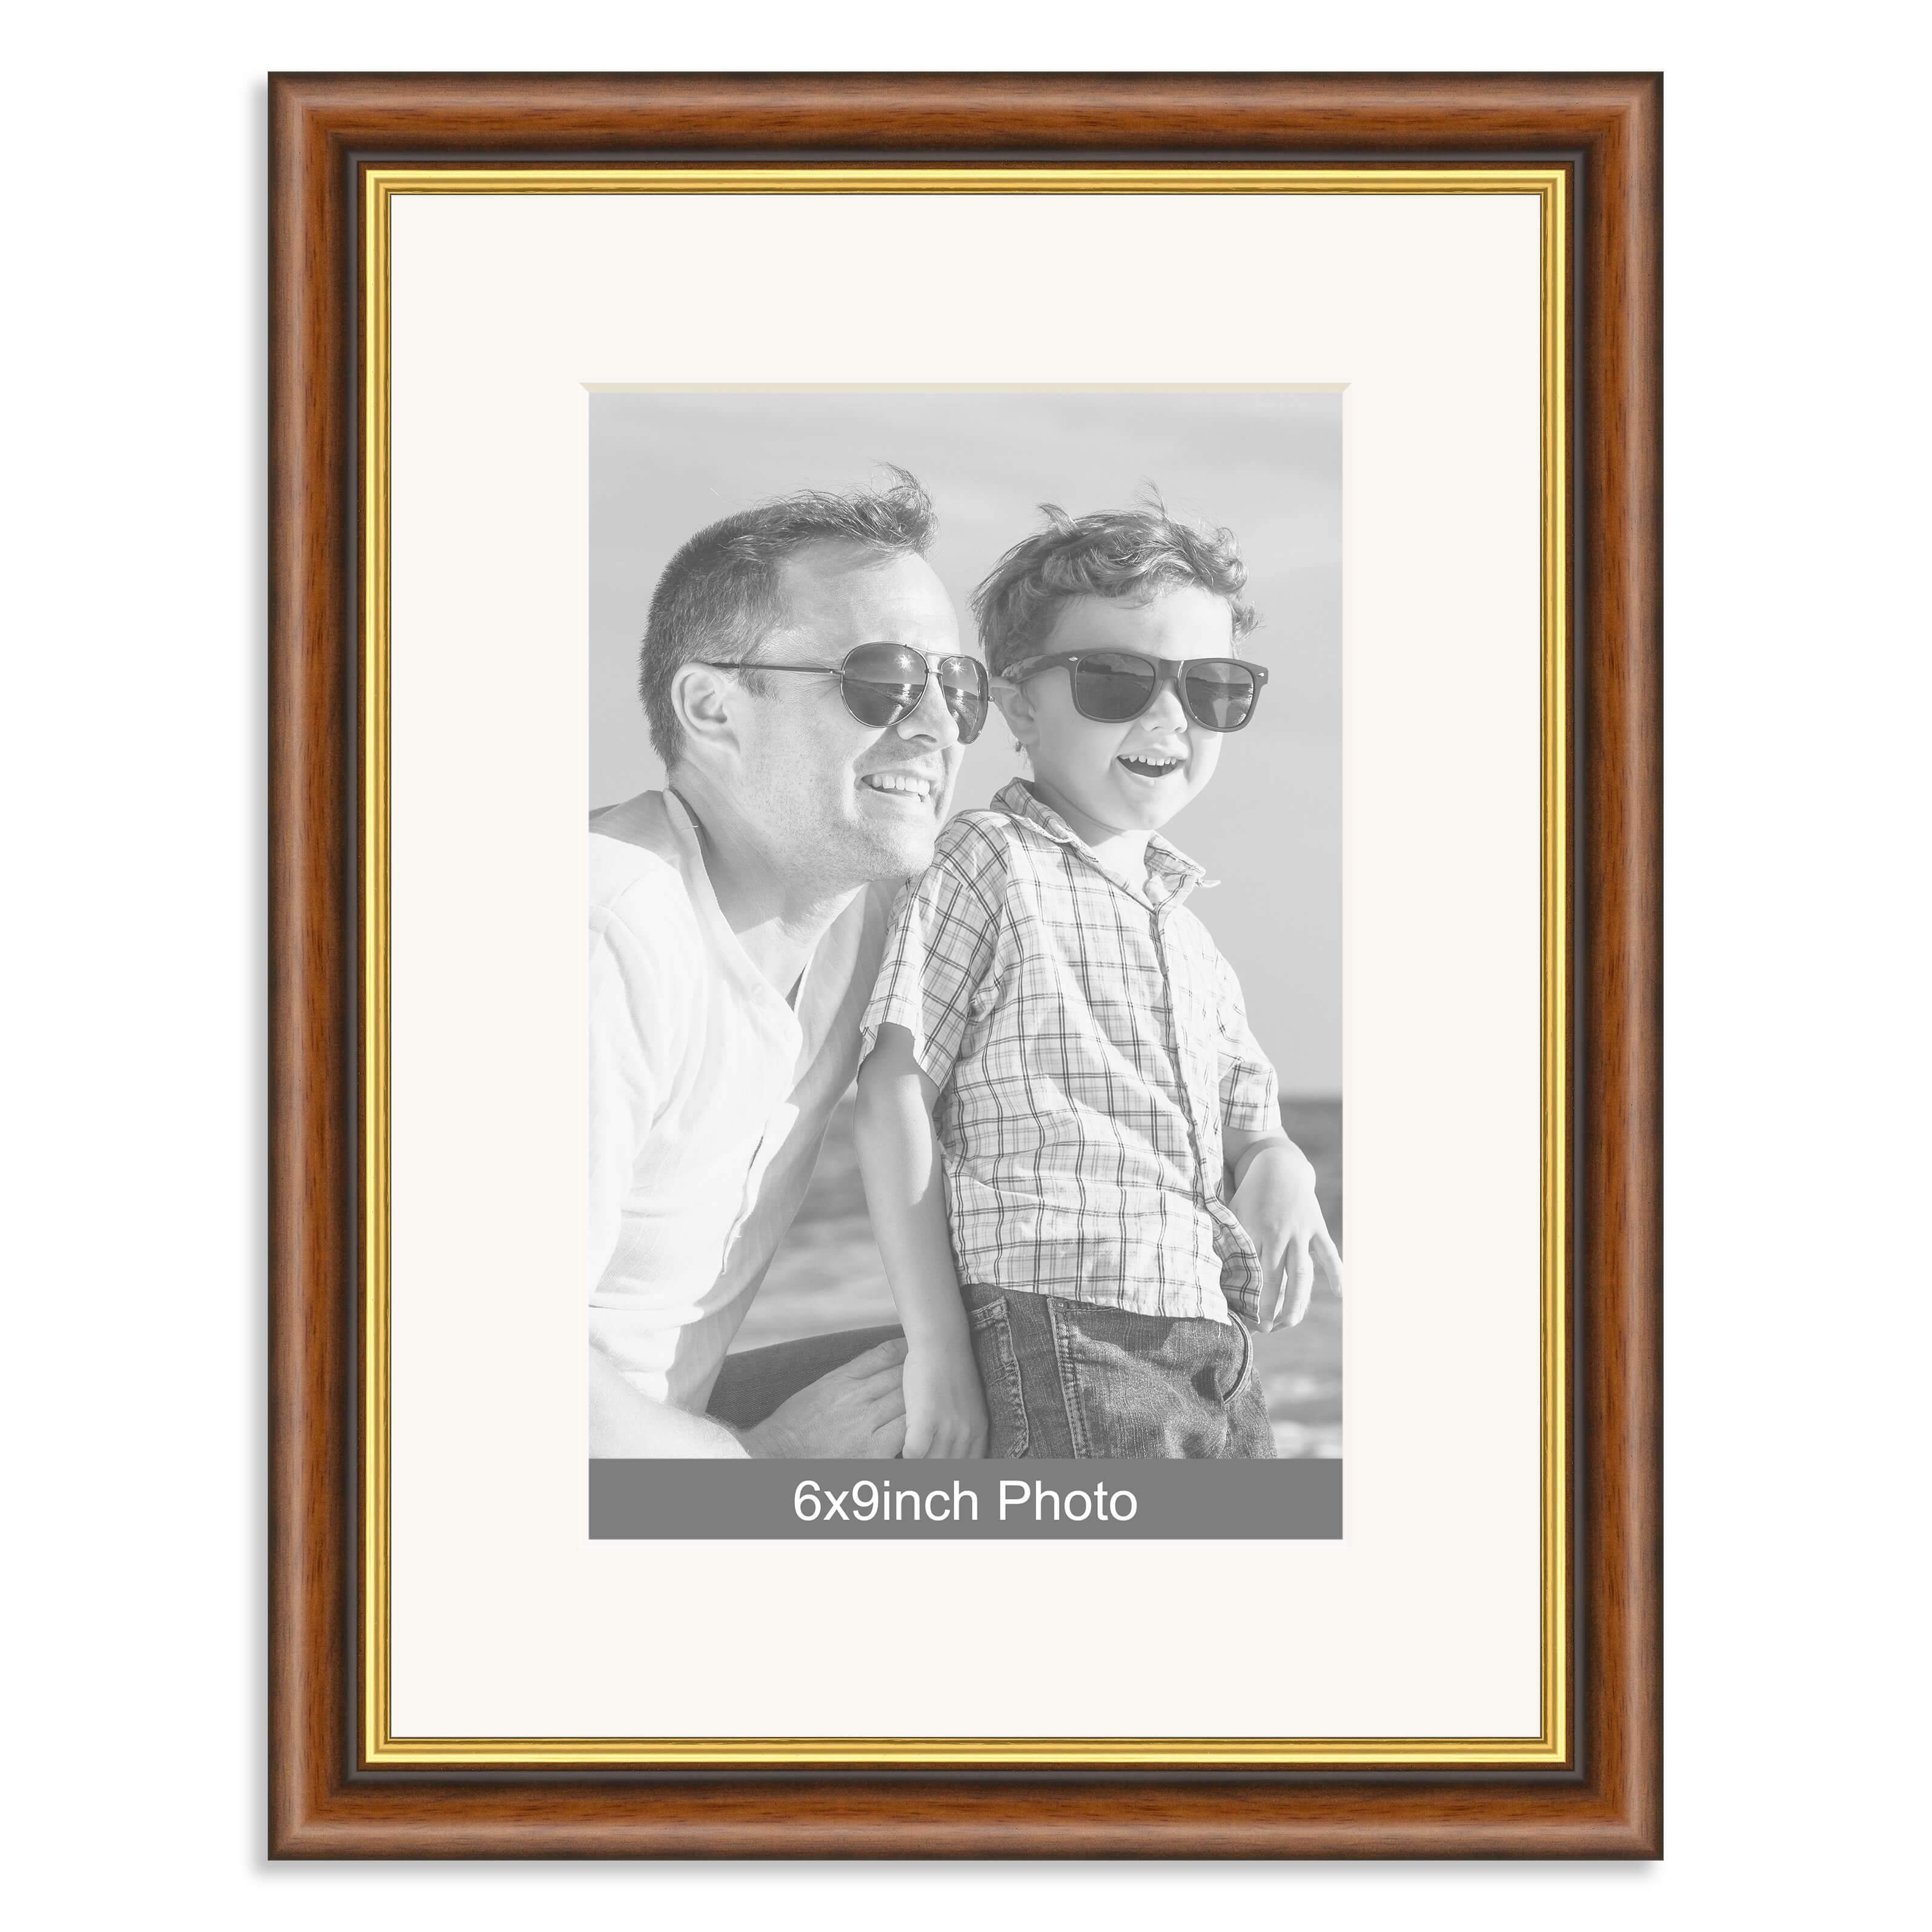 Mahogany & Gold Wooden Photo Frame with mount for a 9×6/6x9in Photo – Photo uploaded below